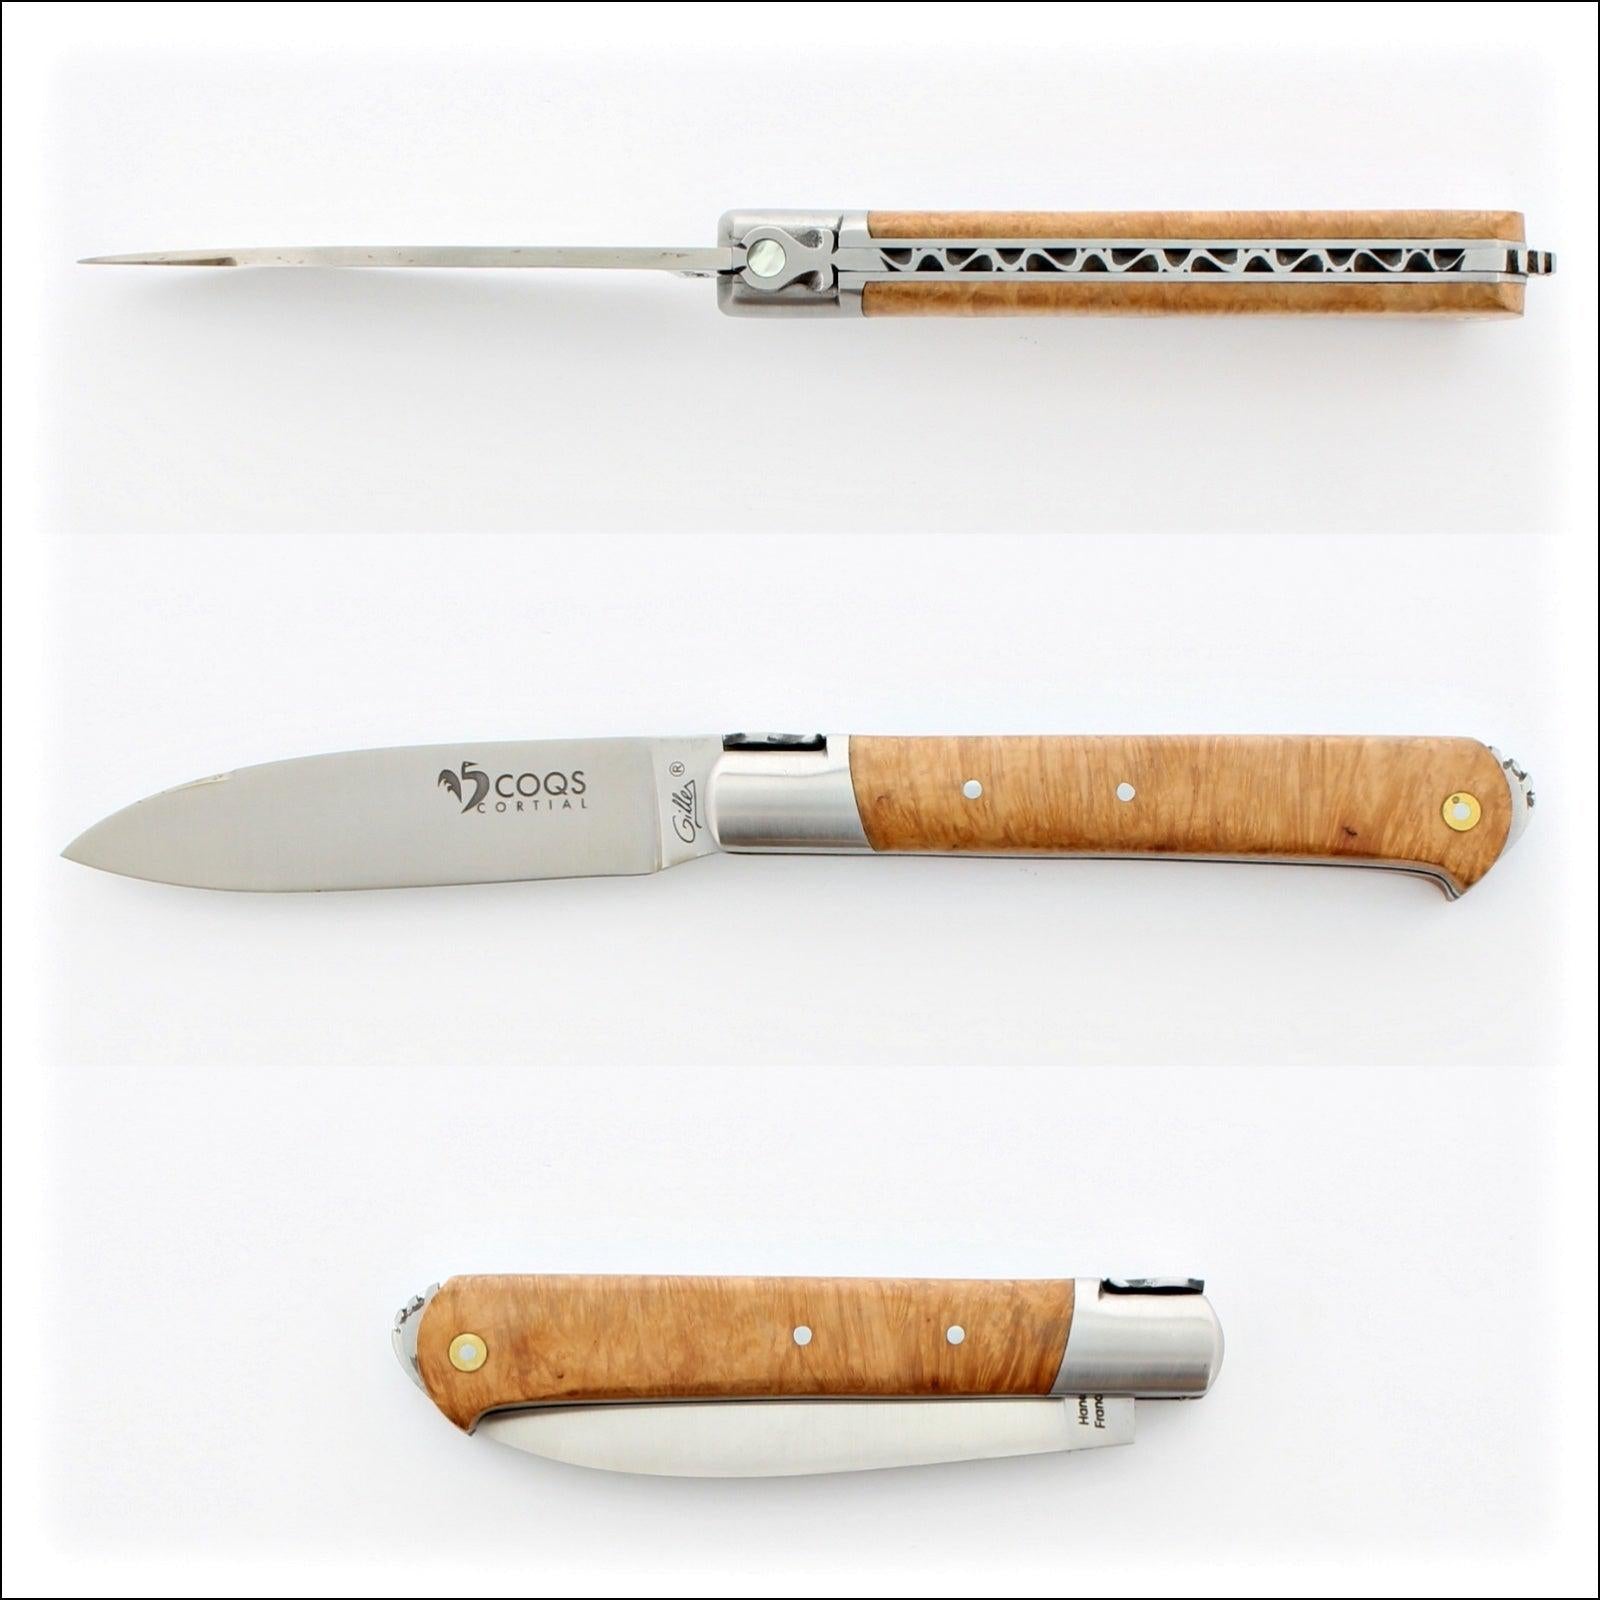 5 Coqs Pocket Knife - Briarwood & Mother of Pearl Inlay